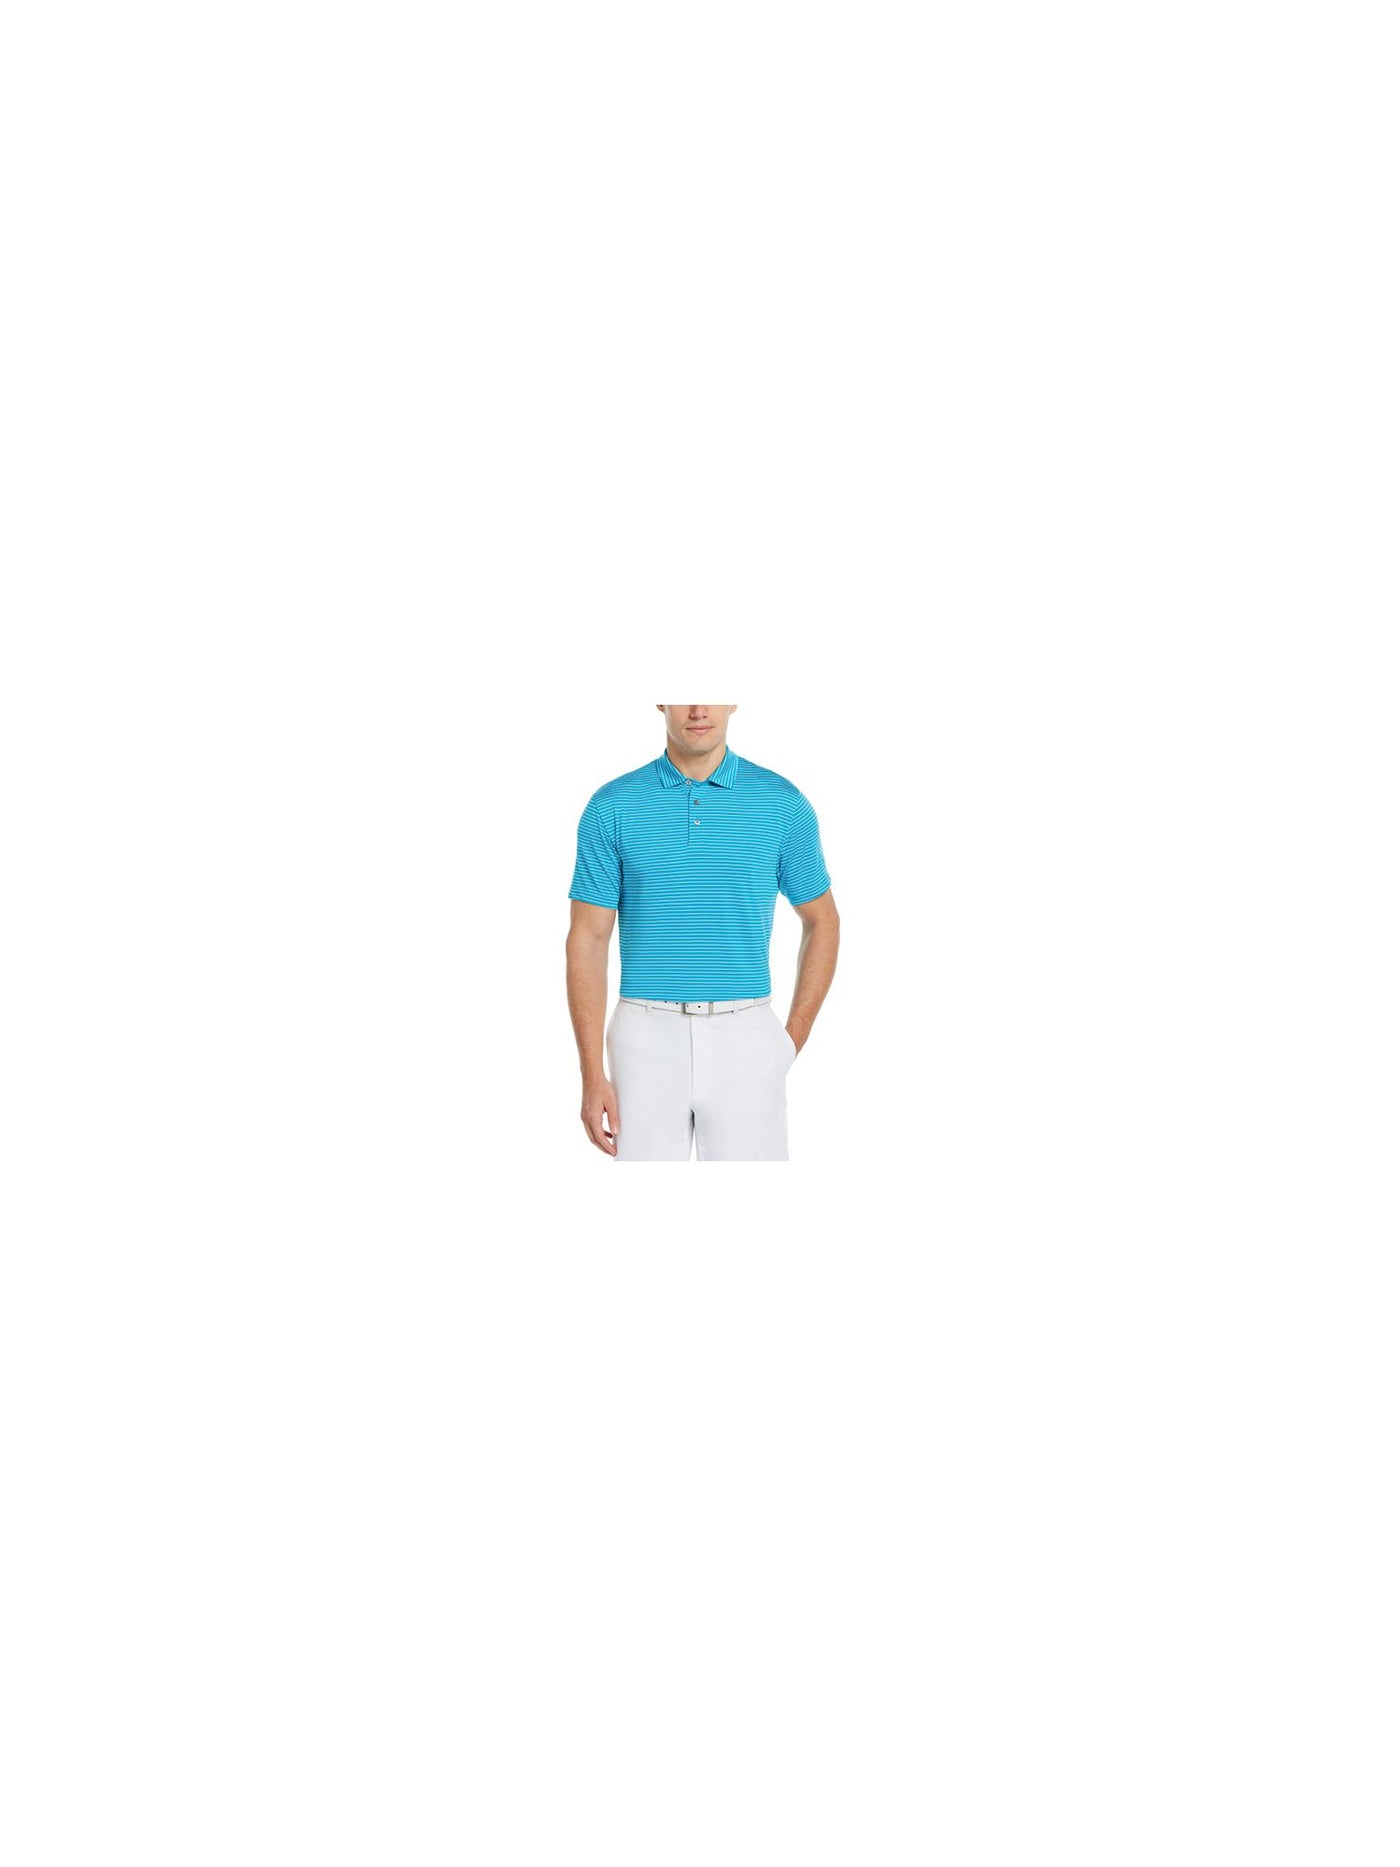 HYBRID APPAREL Mens Turquoise Athletic Fit Moisture Wicking Polo XXL